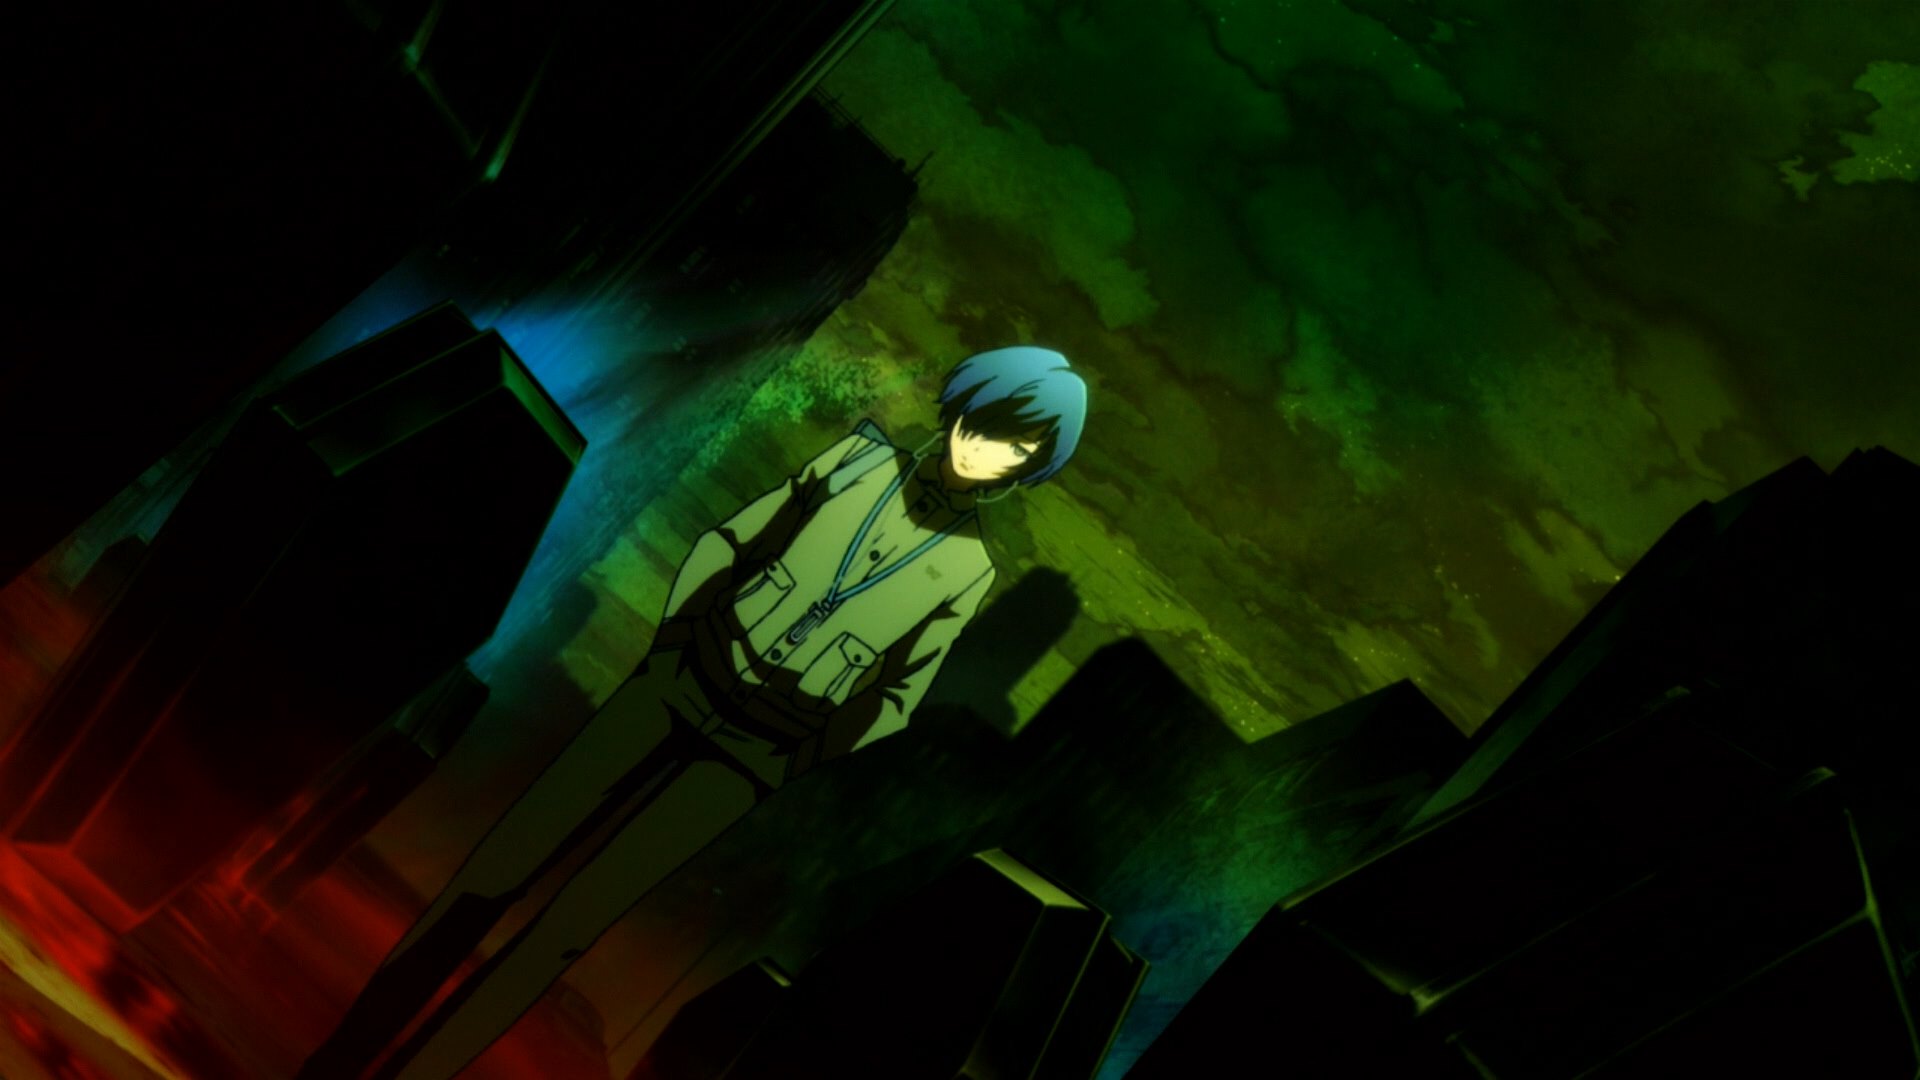 Persona 3 took a whole lot of inspiration from Neon Genesis